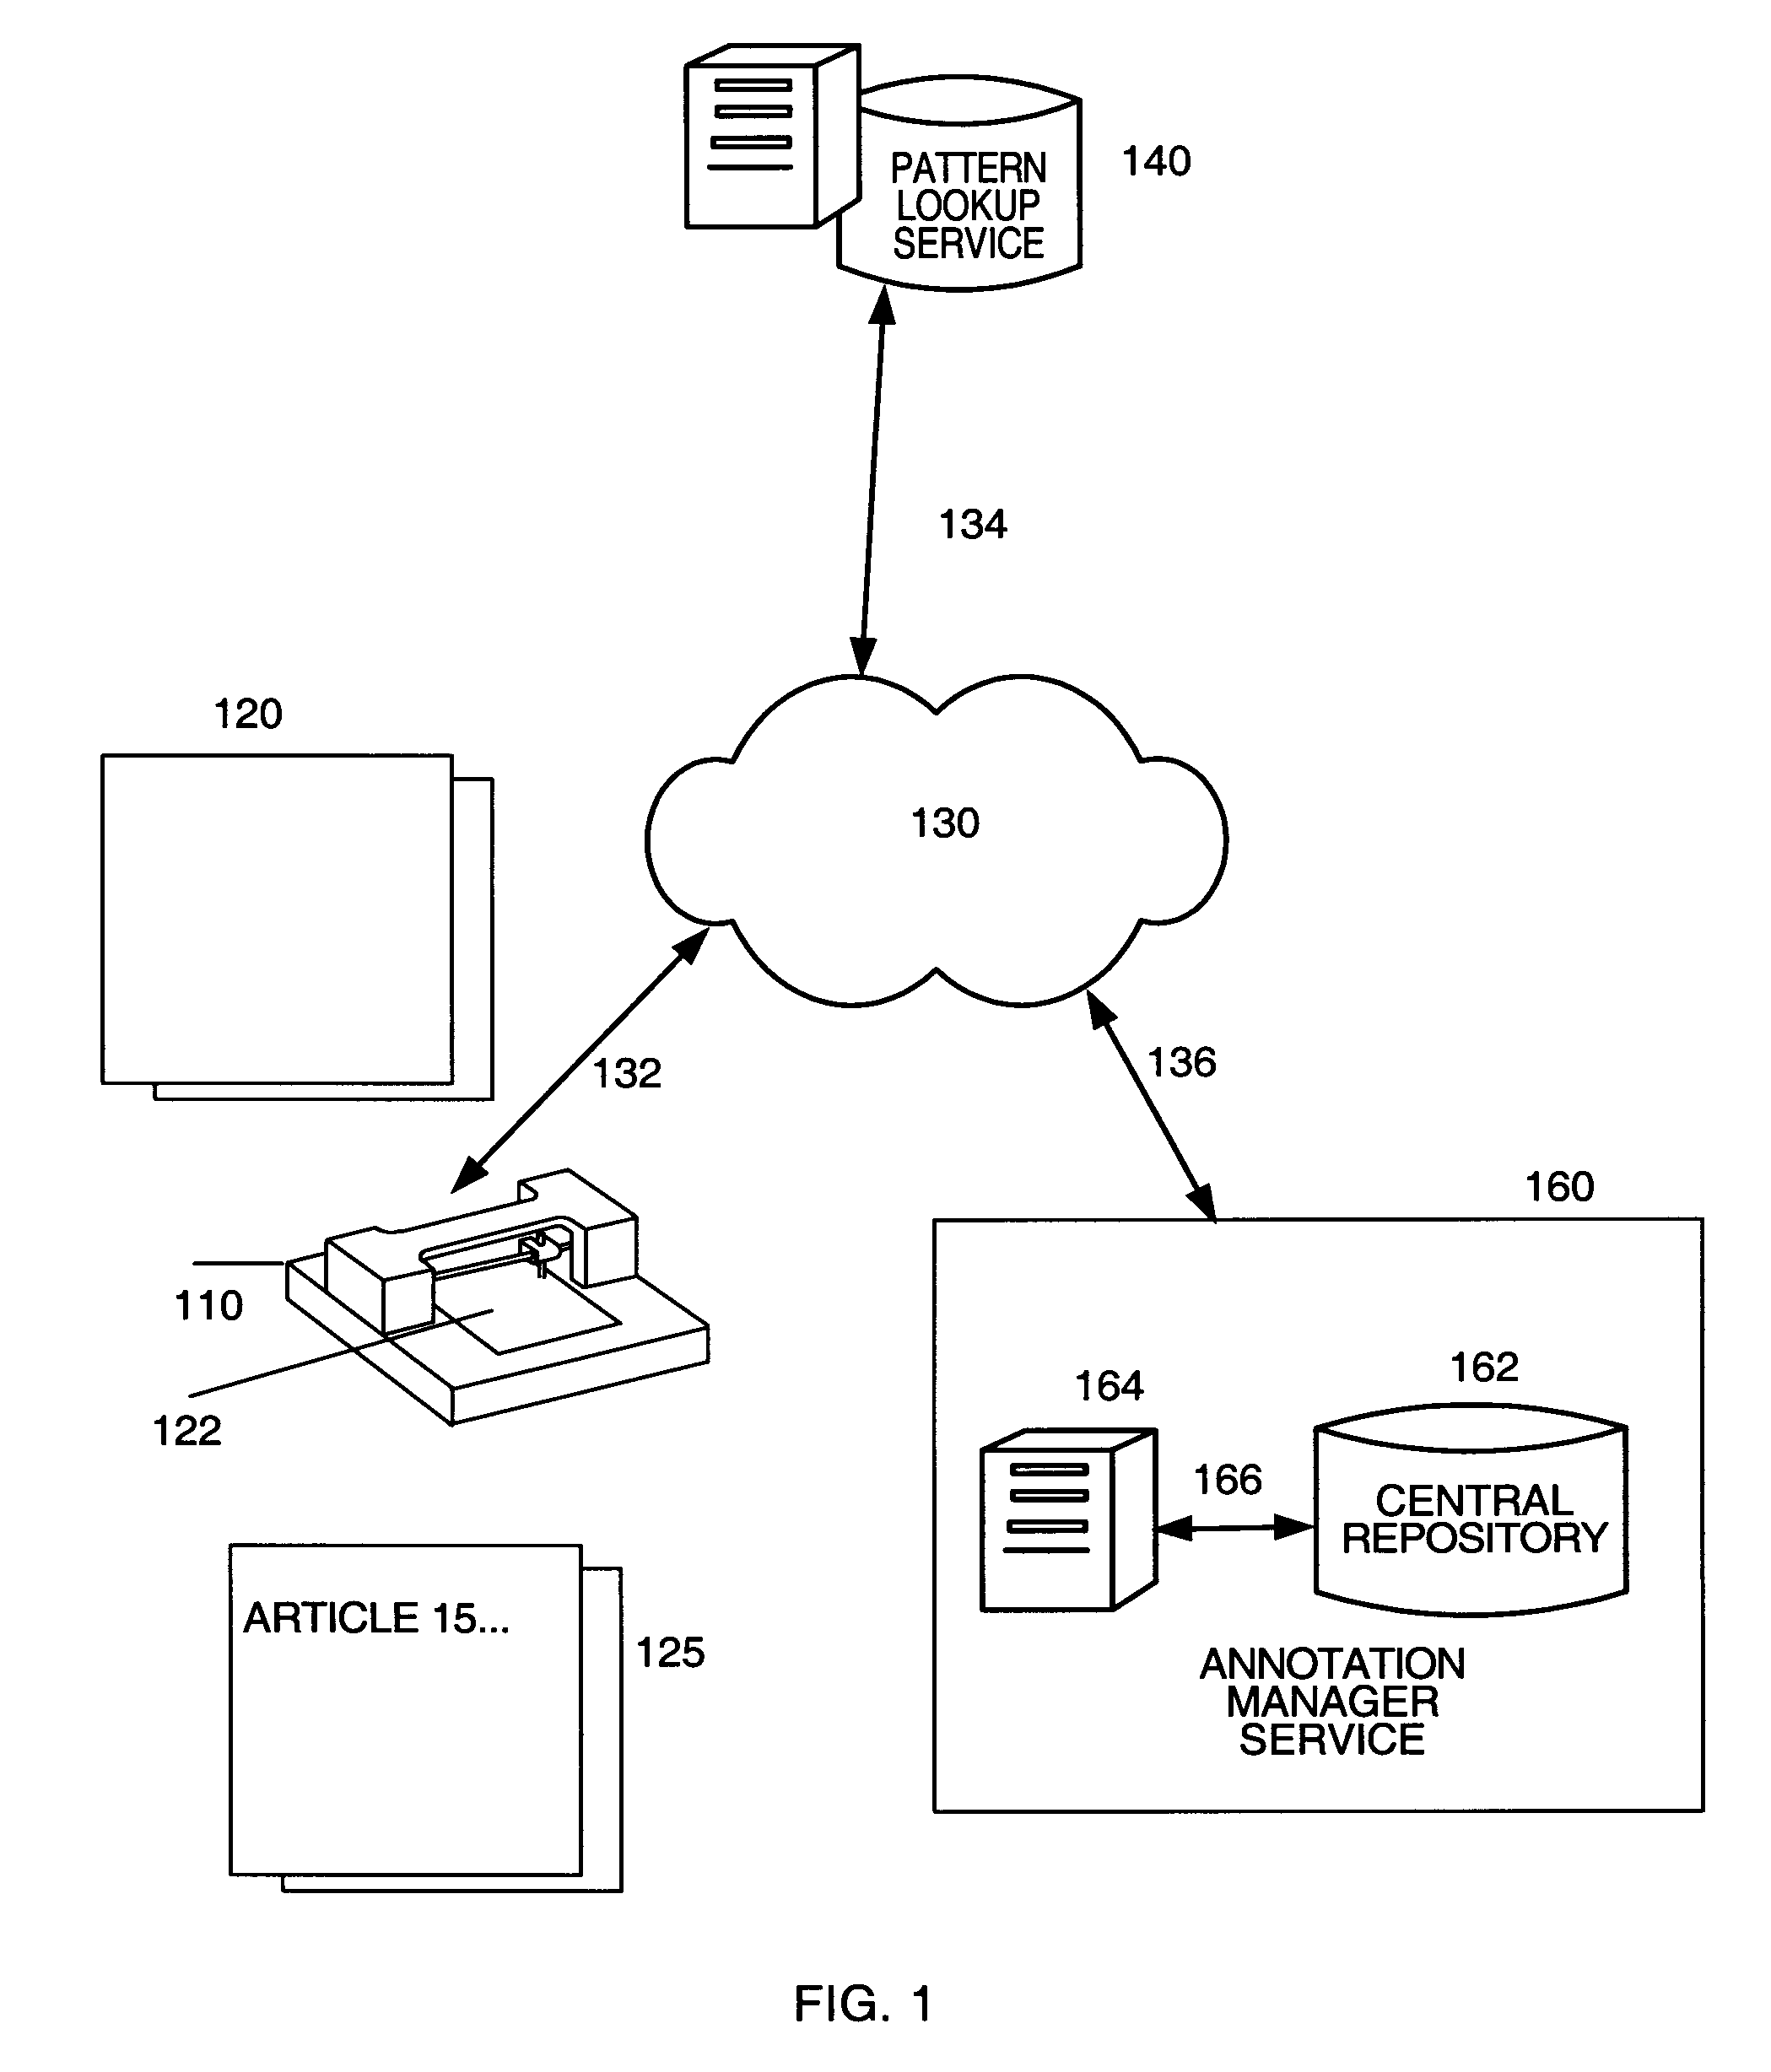 System and method for annotating documents